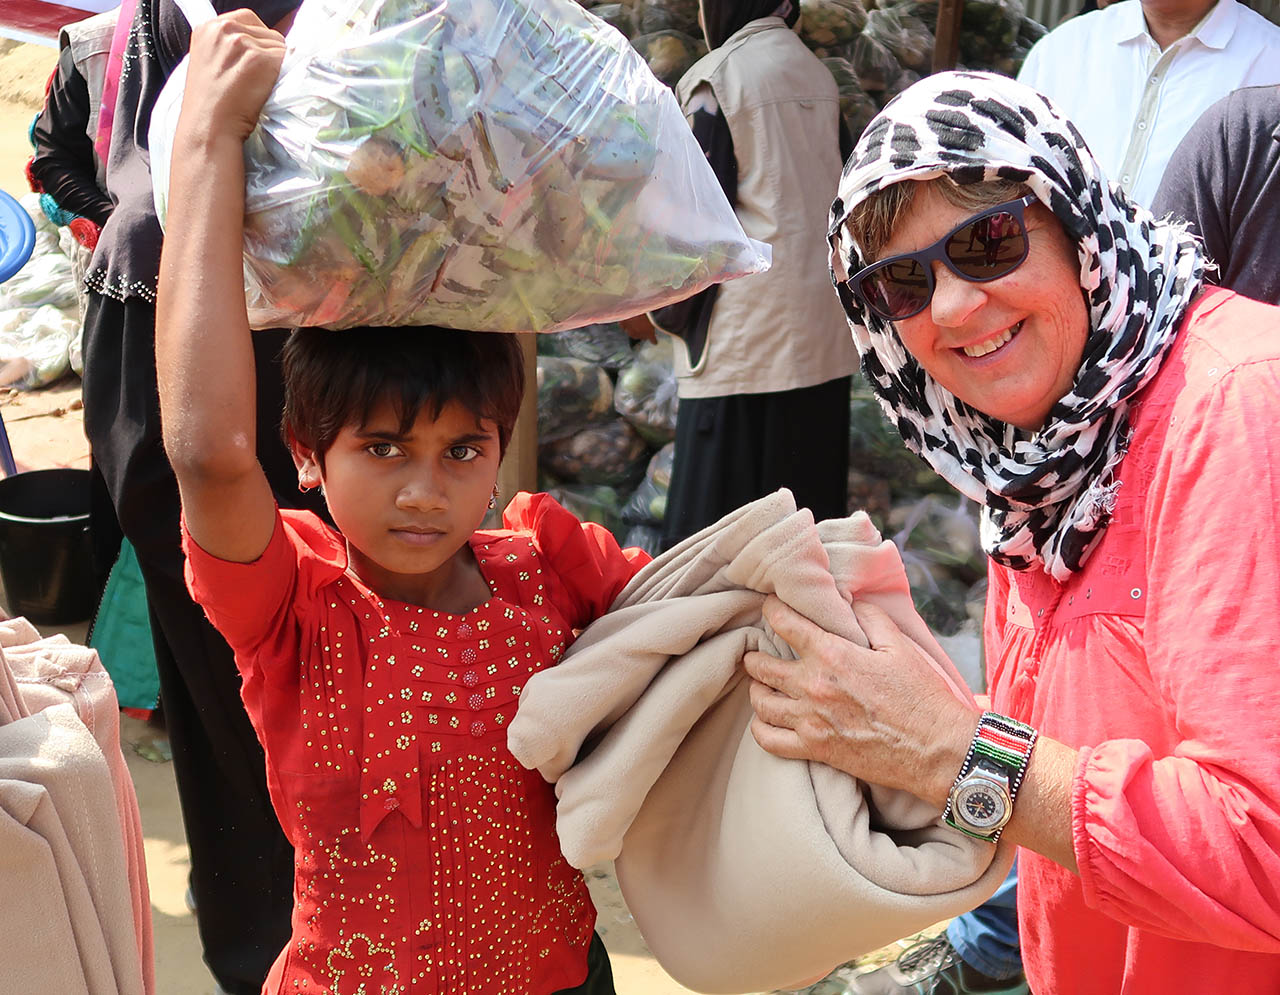 Reach Beyond missionaries distributed 4000 blankets to Rohingya refugees in Bangladesh